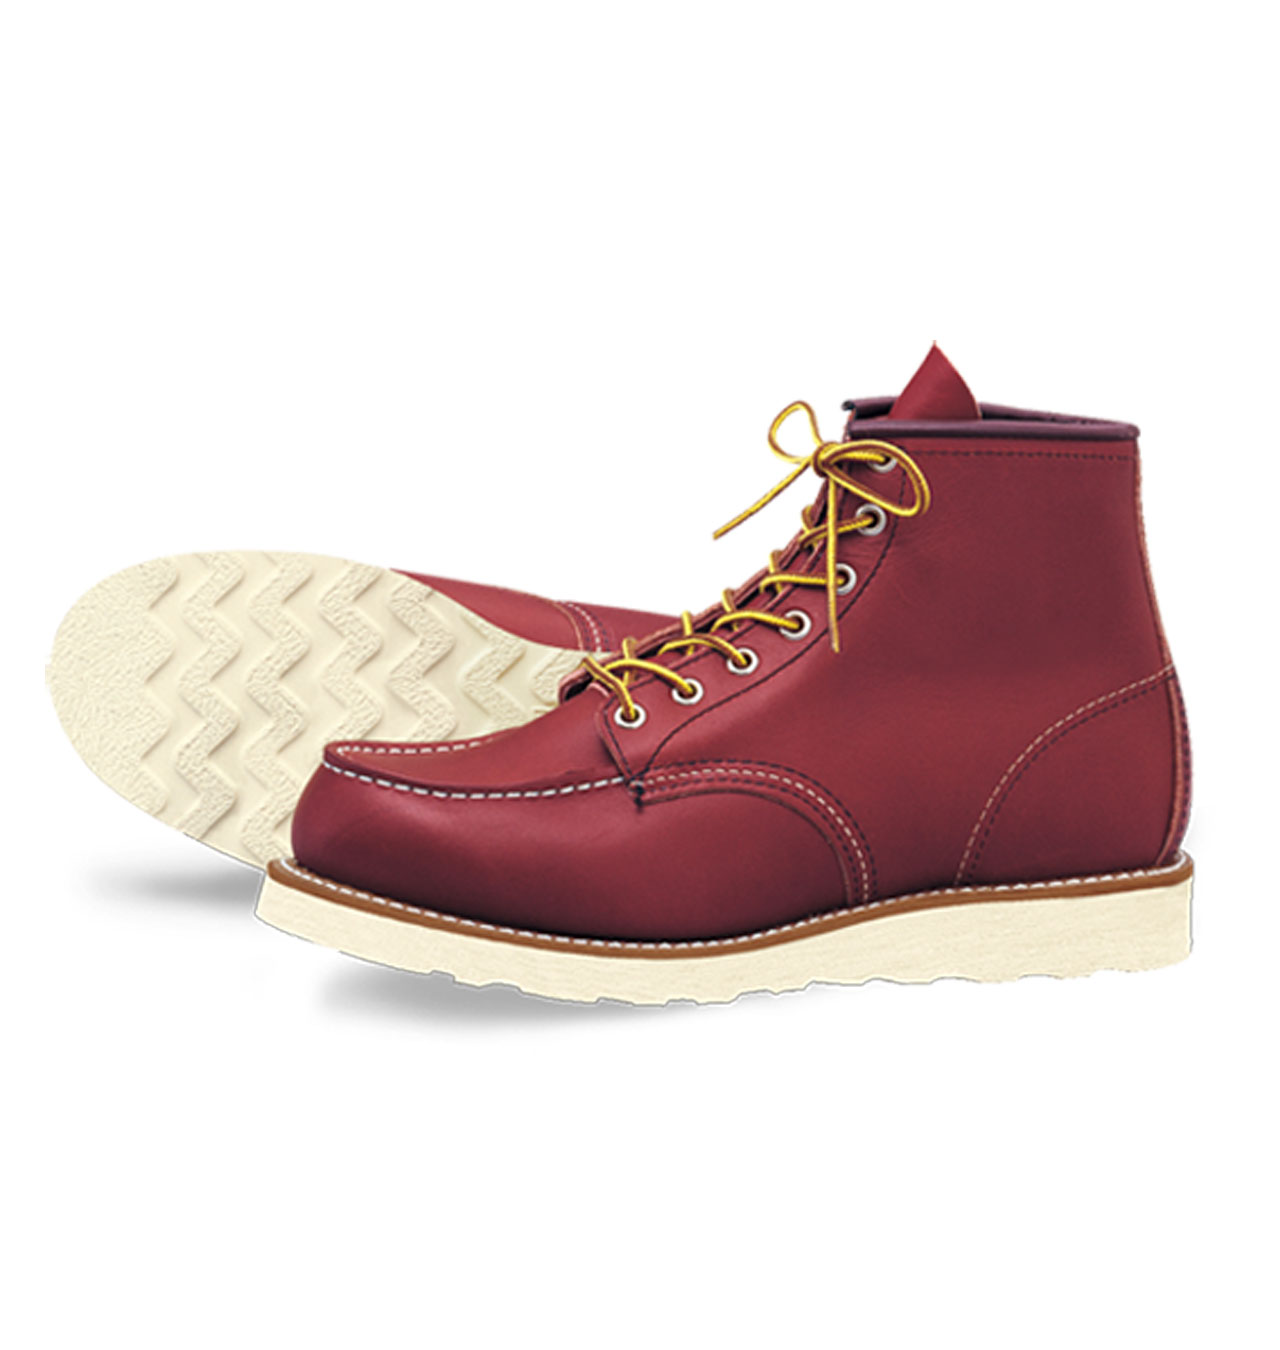 Red Wing Shoes 8875 6-Inch Irish Setter Moc Toe - Oro-russet Portage